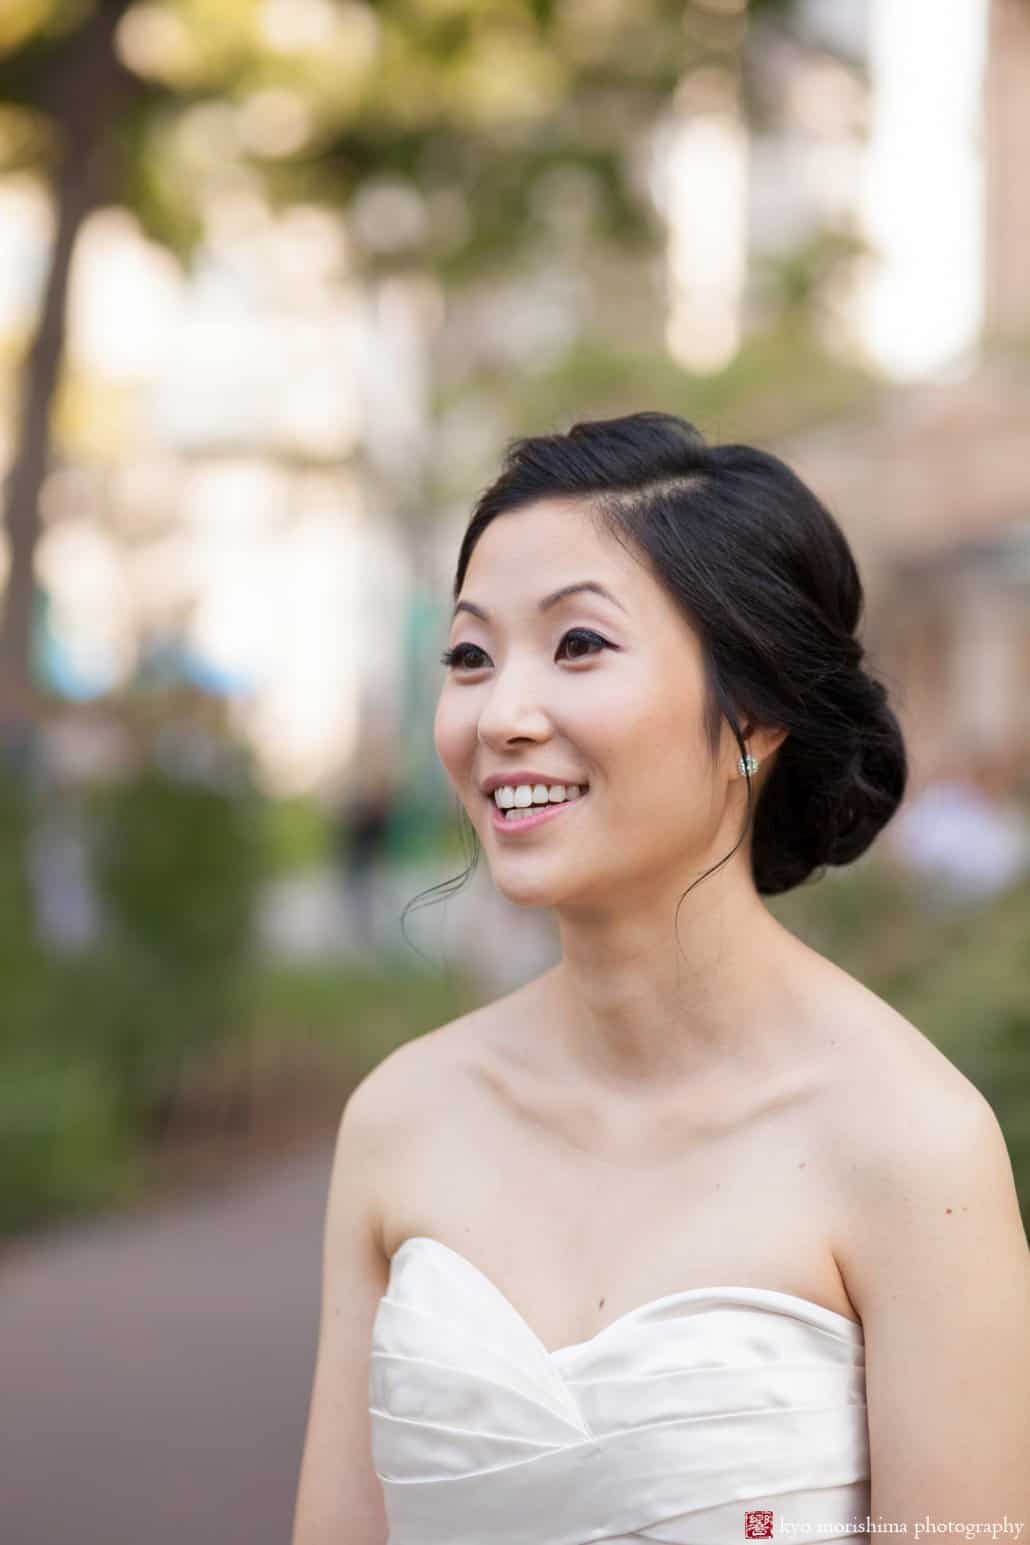 Korean bride with makeup by Vicky C5, photographed by Kyo Morishima